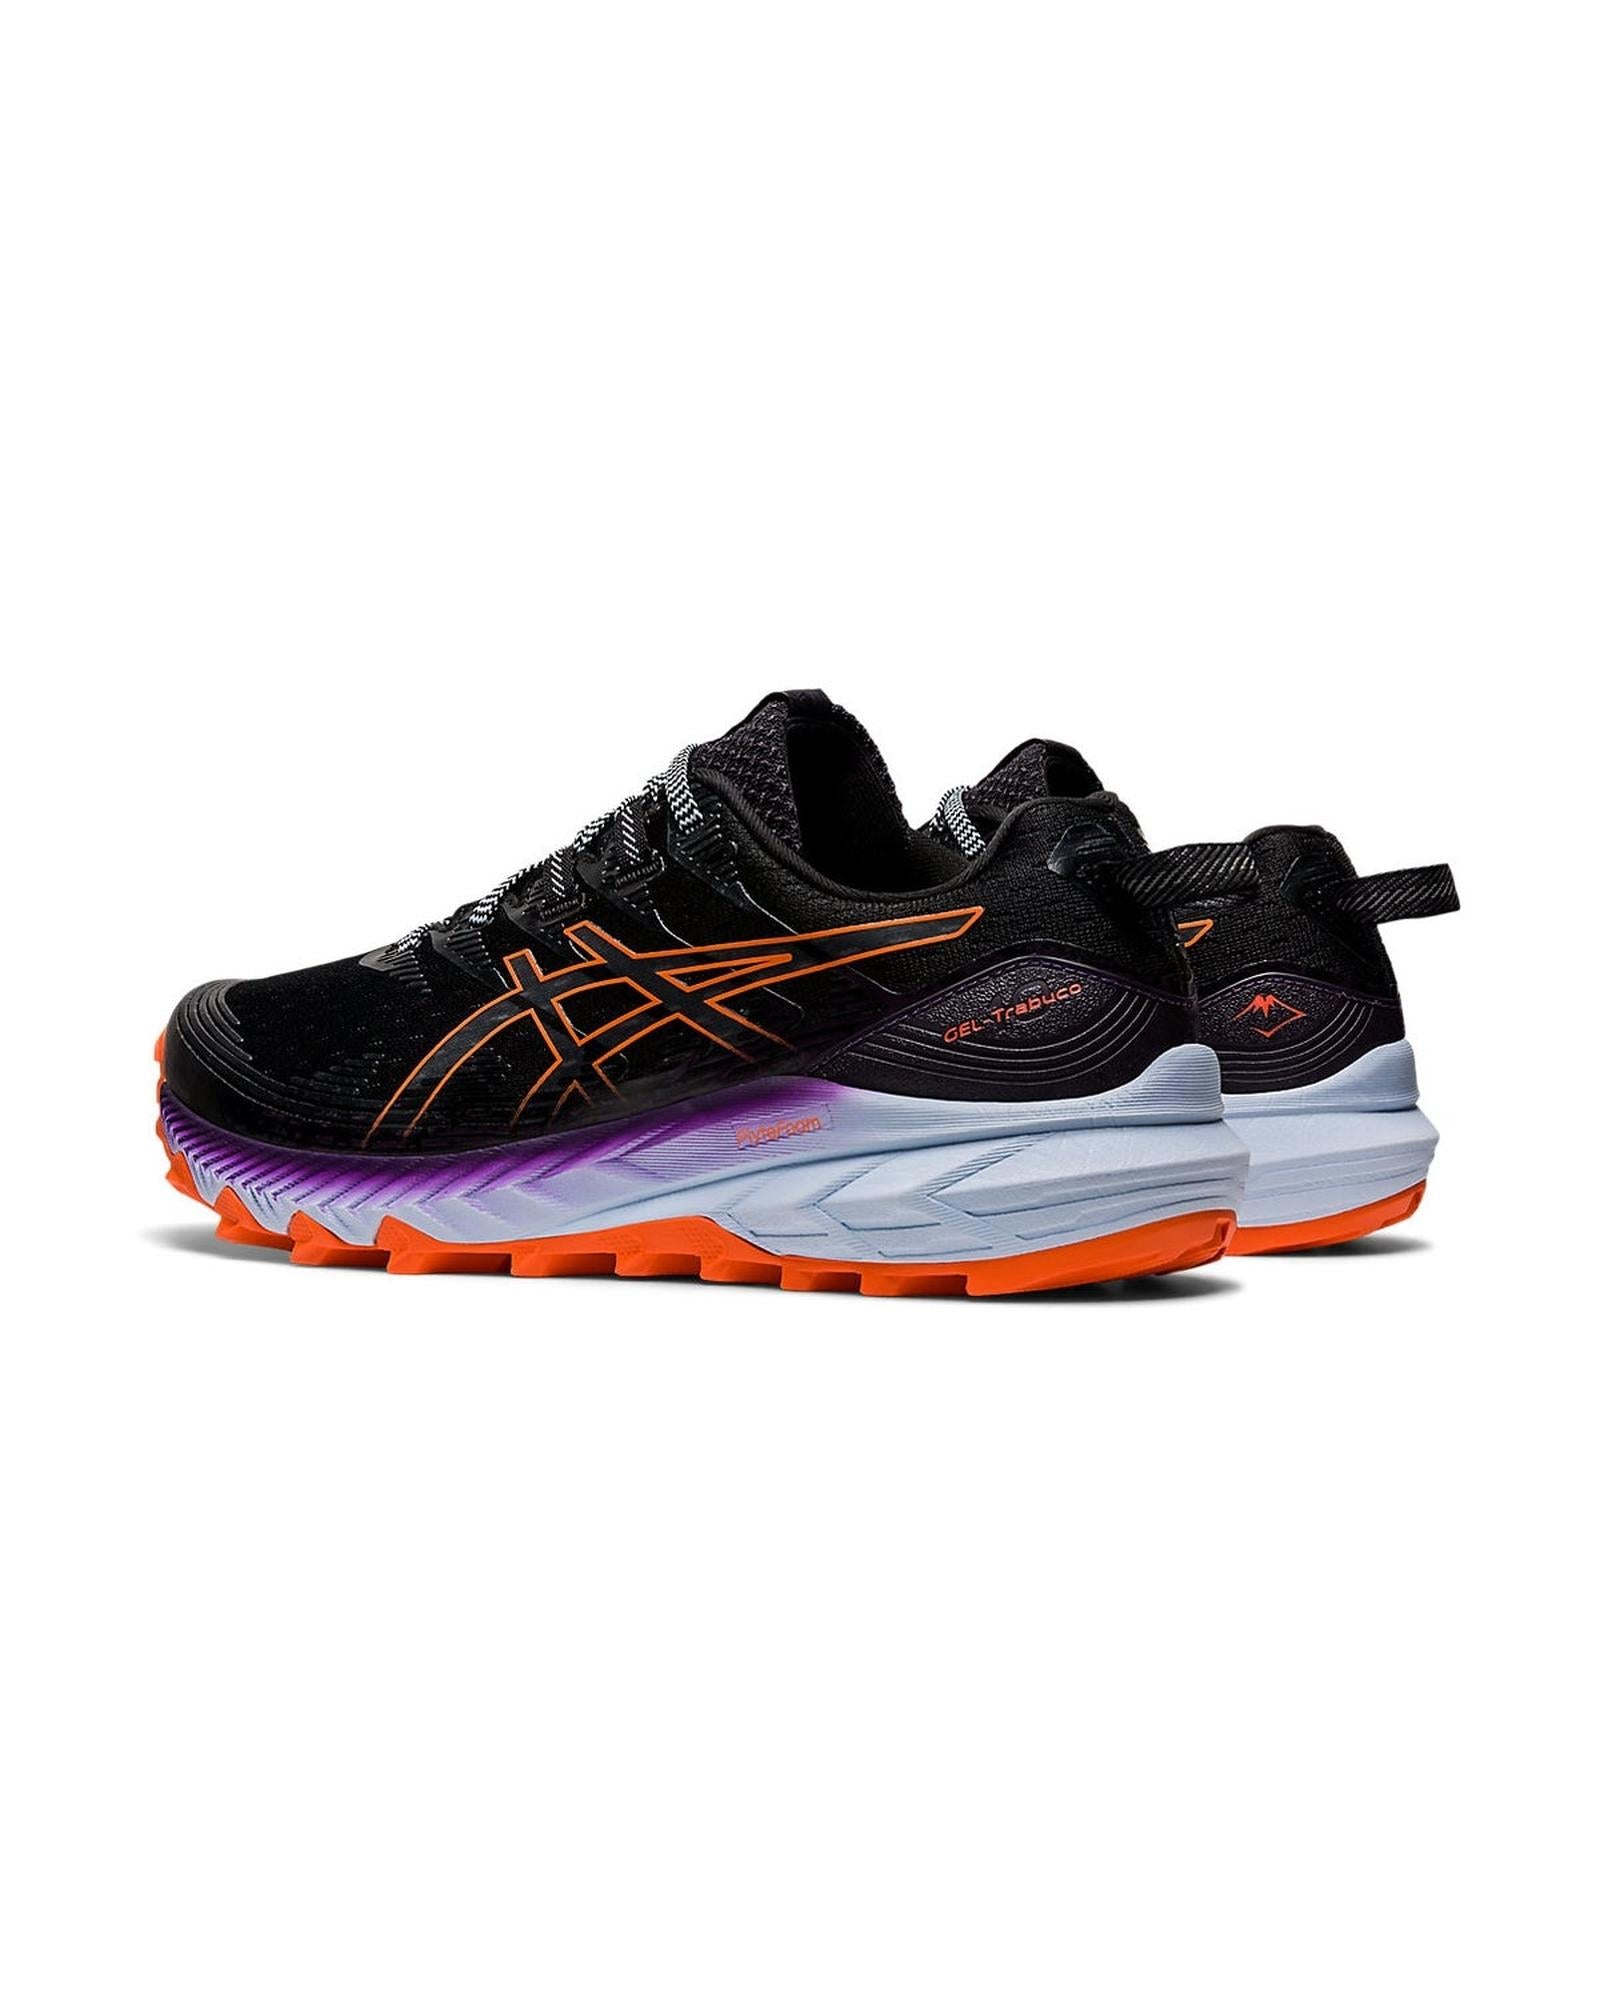 Advanced Trail Running Shoes with Rock Protection Plate and ASICSGRIP Outsole - 7 US